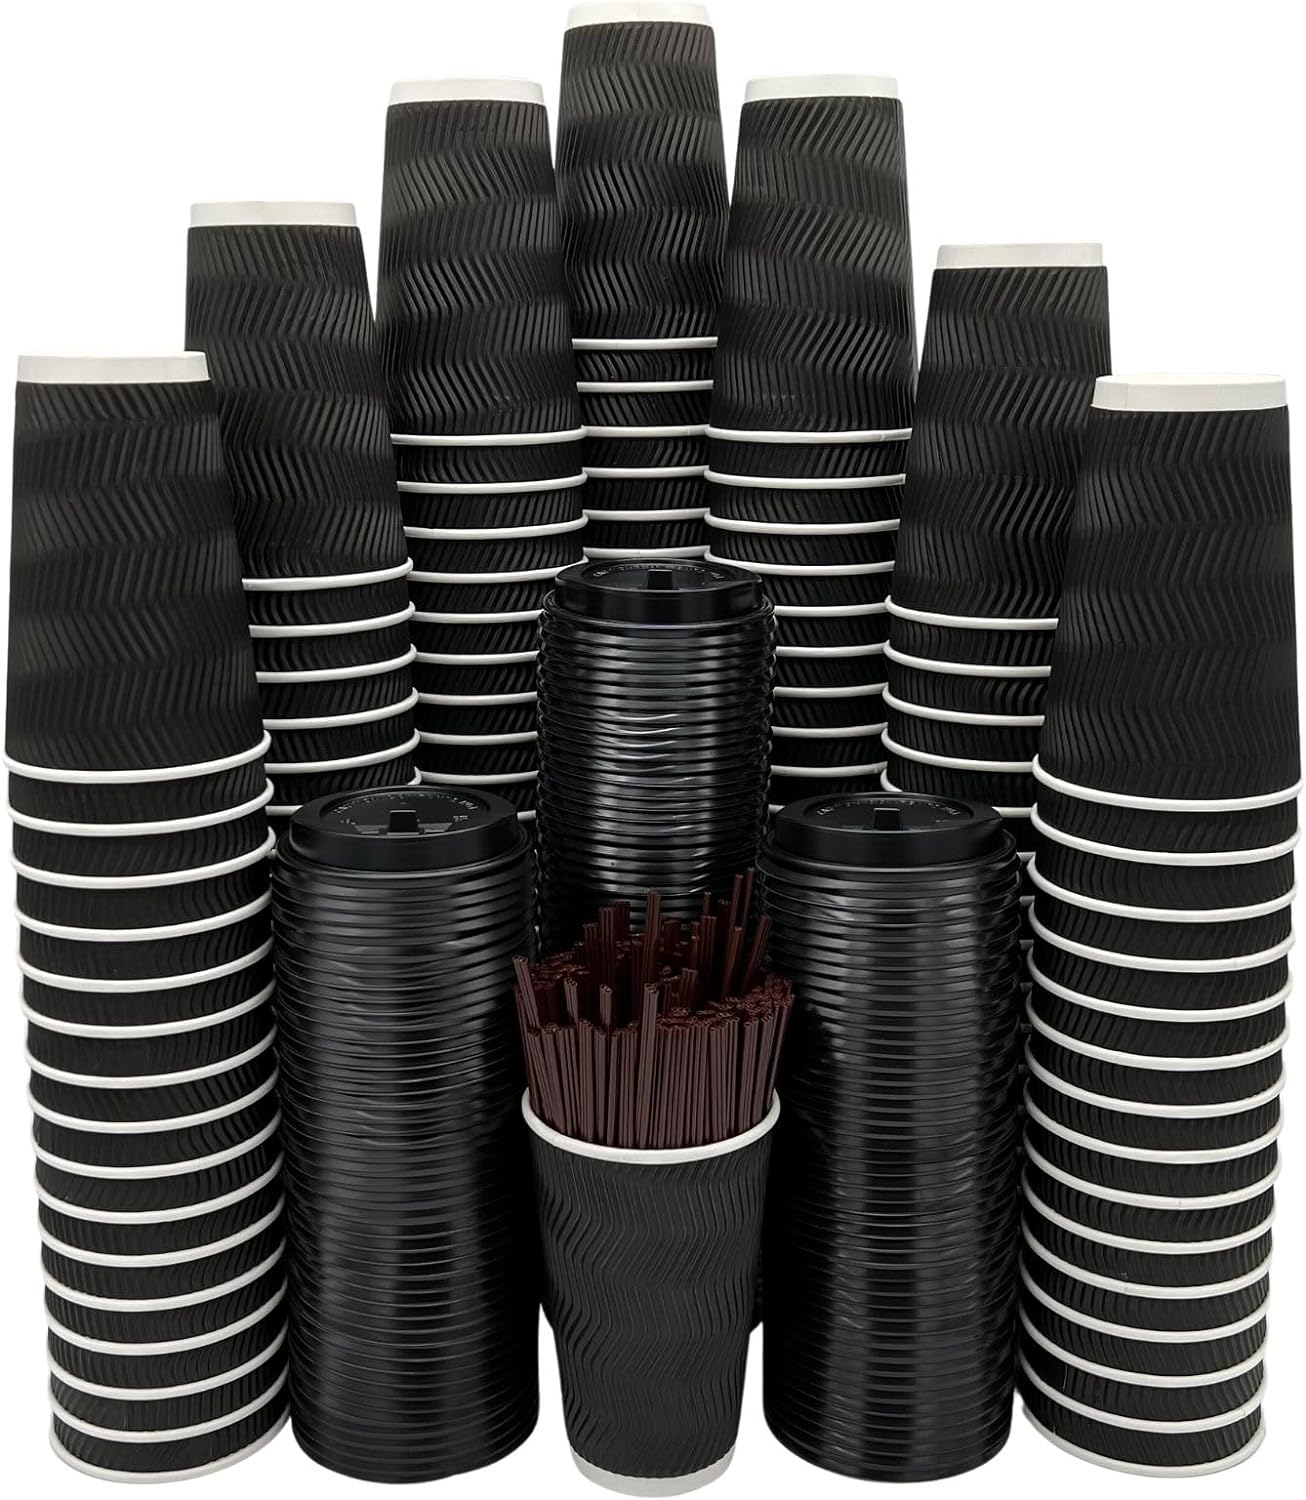 Premium [150 Pack] 16 oz Double Ripple Wall Disposable Hot Coffee Cups with Lids and Straws | Leak-proof and Insulated Design | Eco-Friendly | Perfect for Home, Office, and Travel